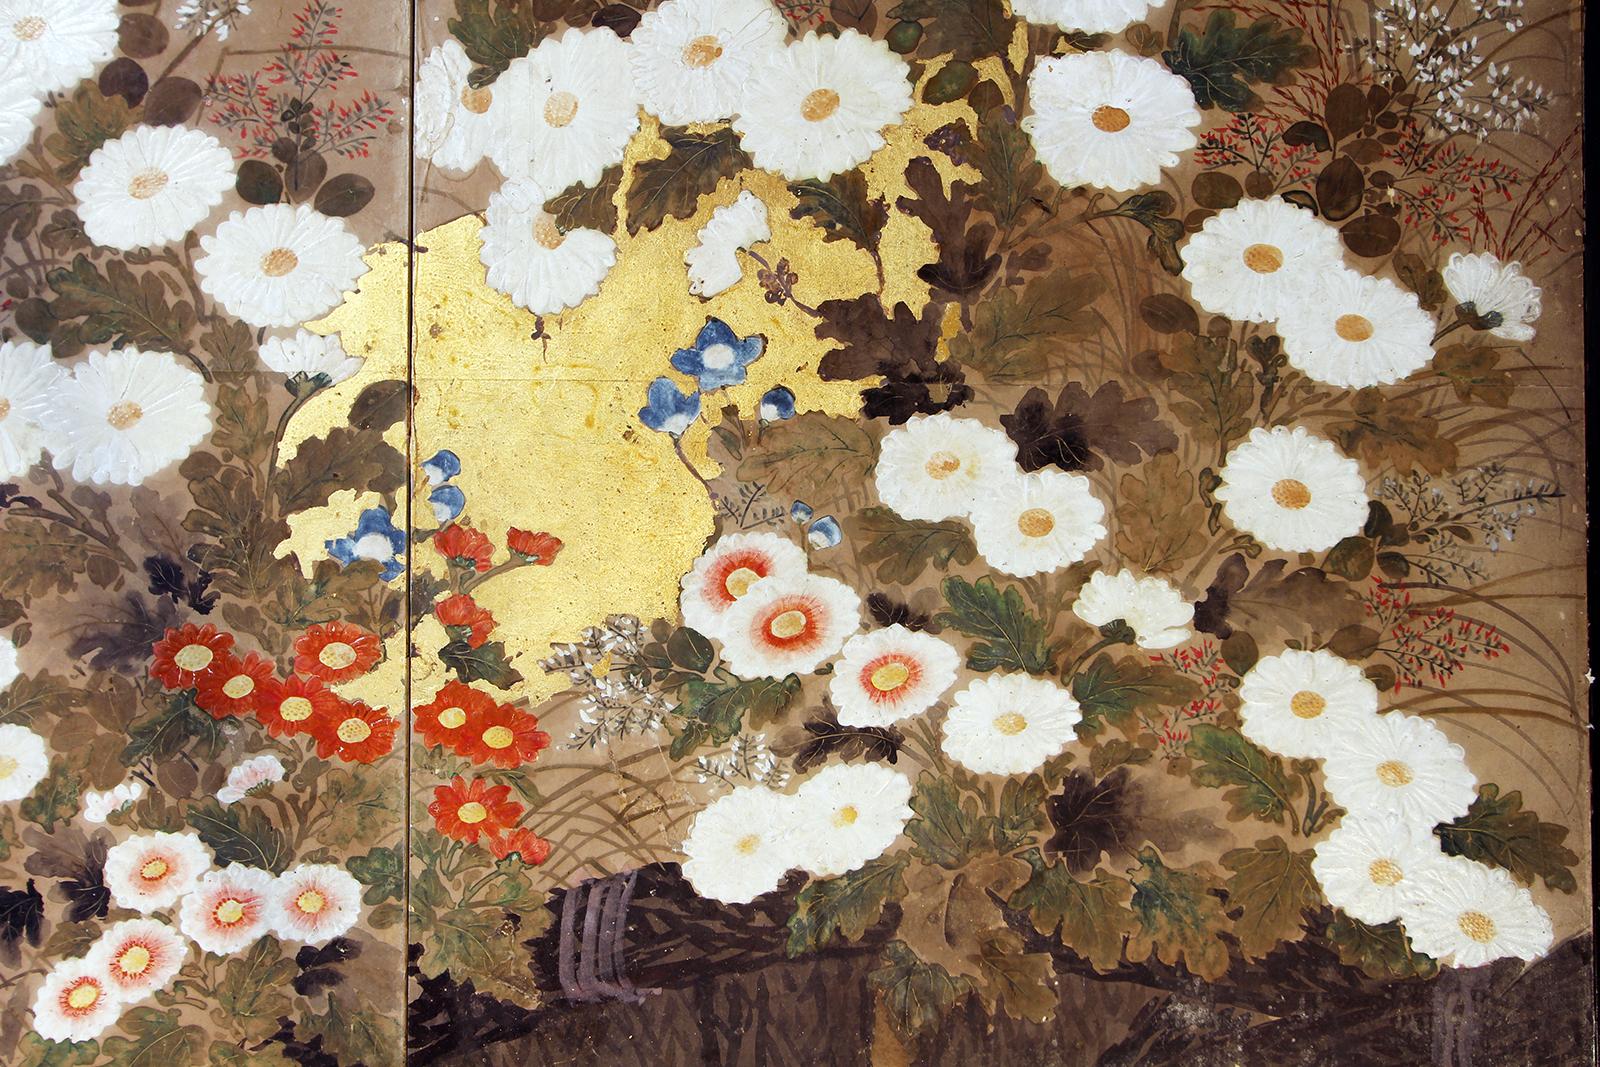 Early 19th century two panel screen from the Rinpa school Two panels painted with mineral pigments on gold leaf and rice paper.
The flowers are made with the 